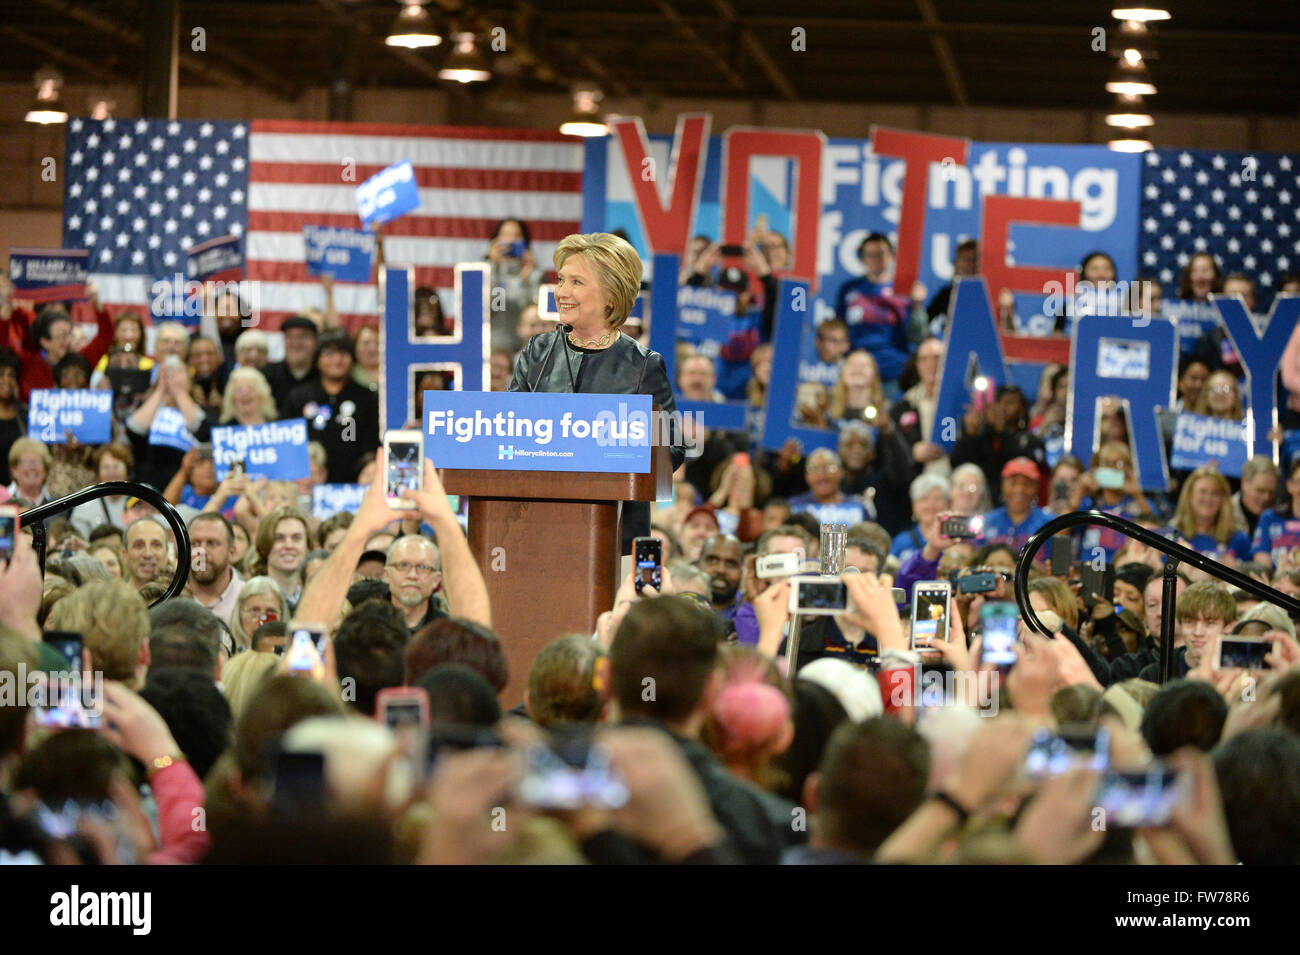 Saint Louis, MO, USA – March 12, 2016: Democratic presidential candidate and former Secretary of State Hillary Clinton campaigns Stock Photo